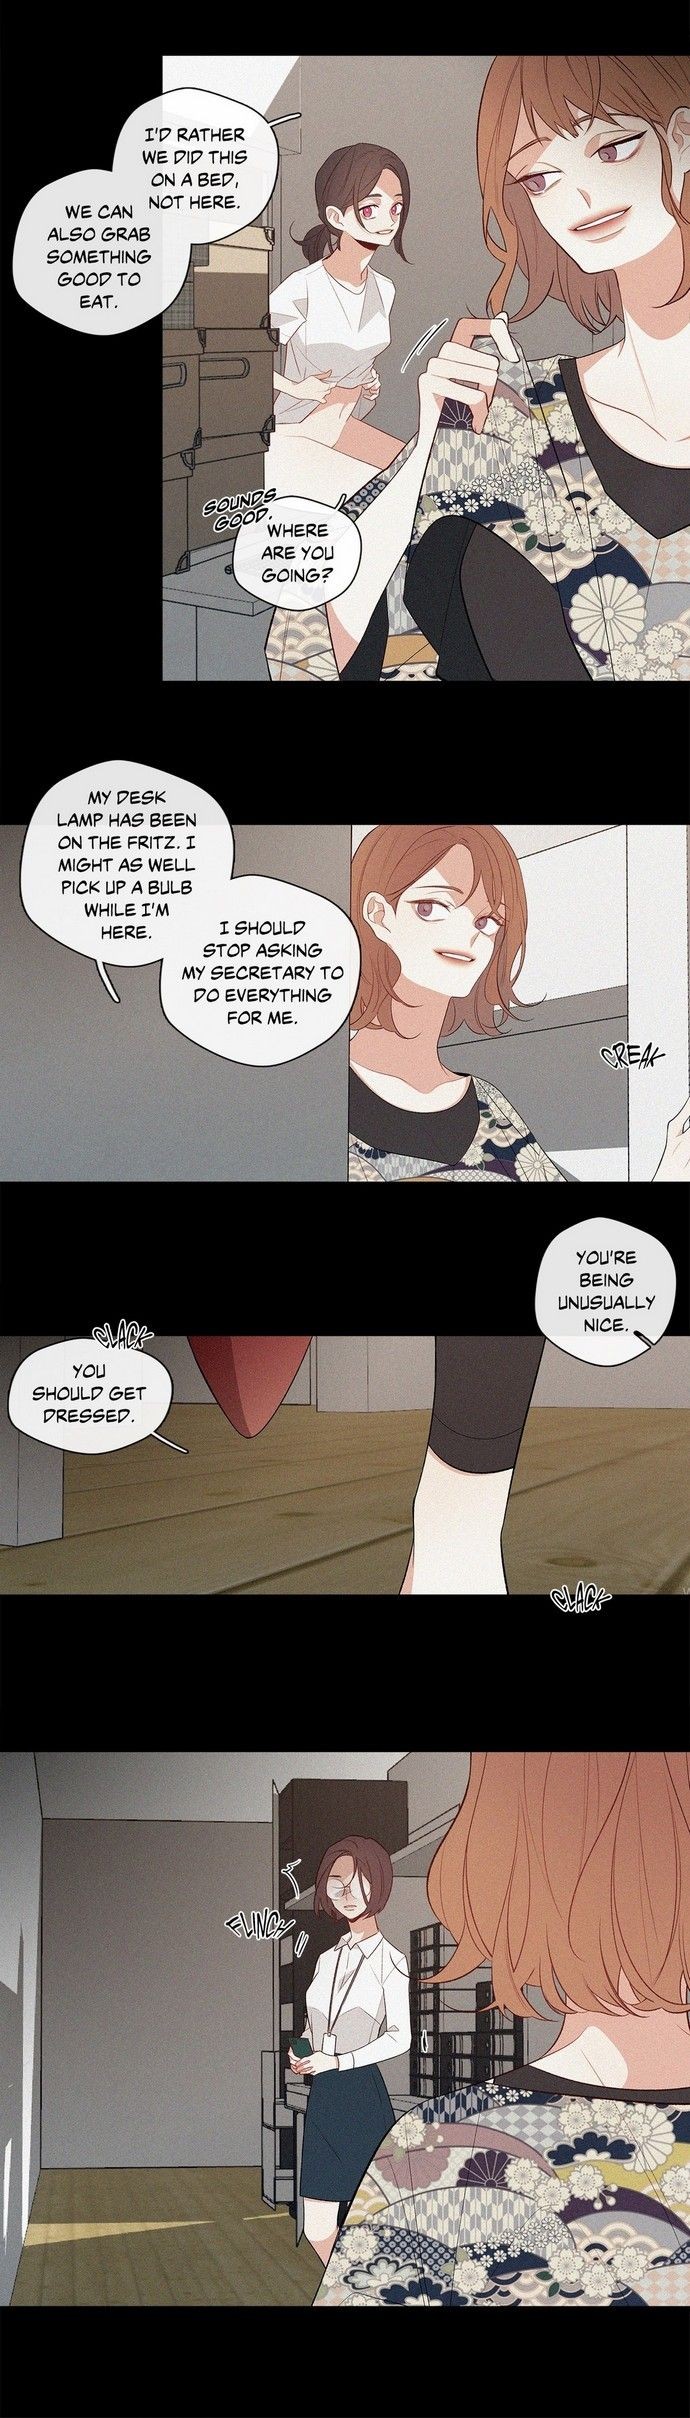 Two Birds in Spring - Chapter 56 Page 6